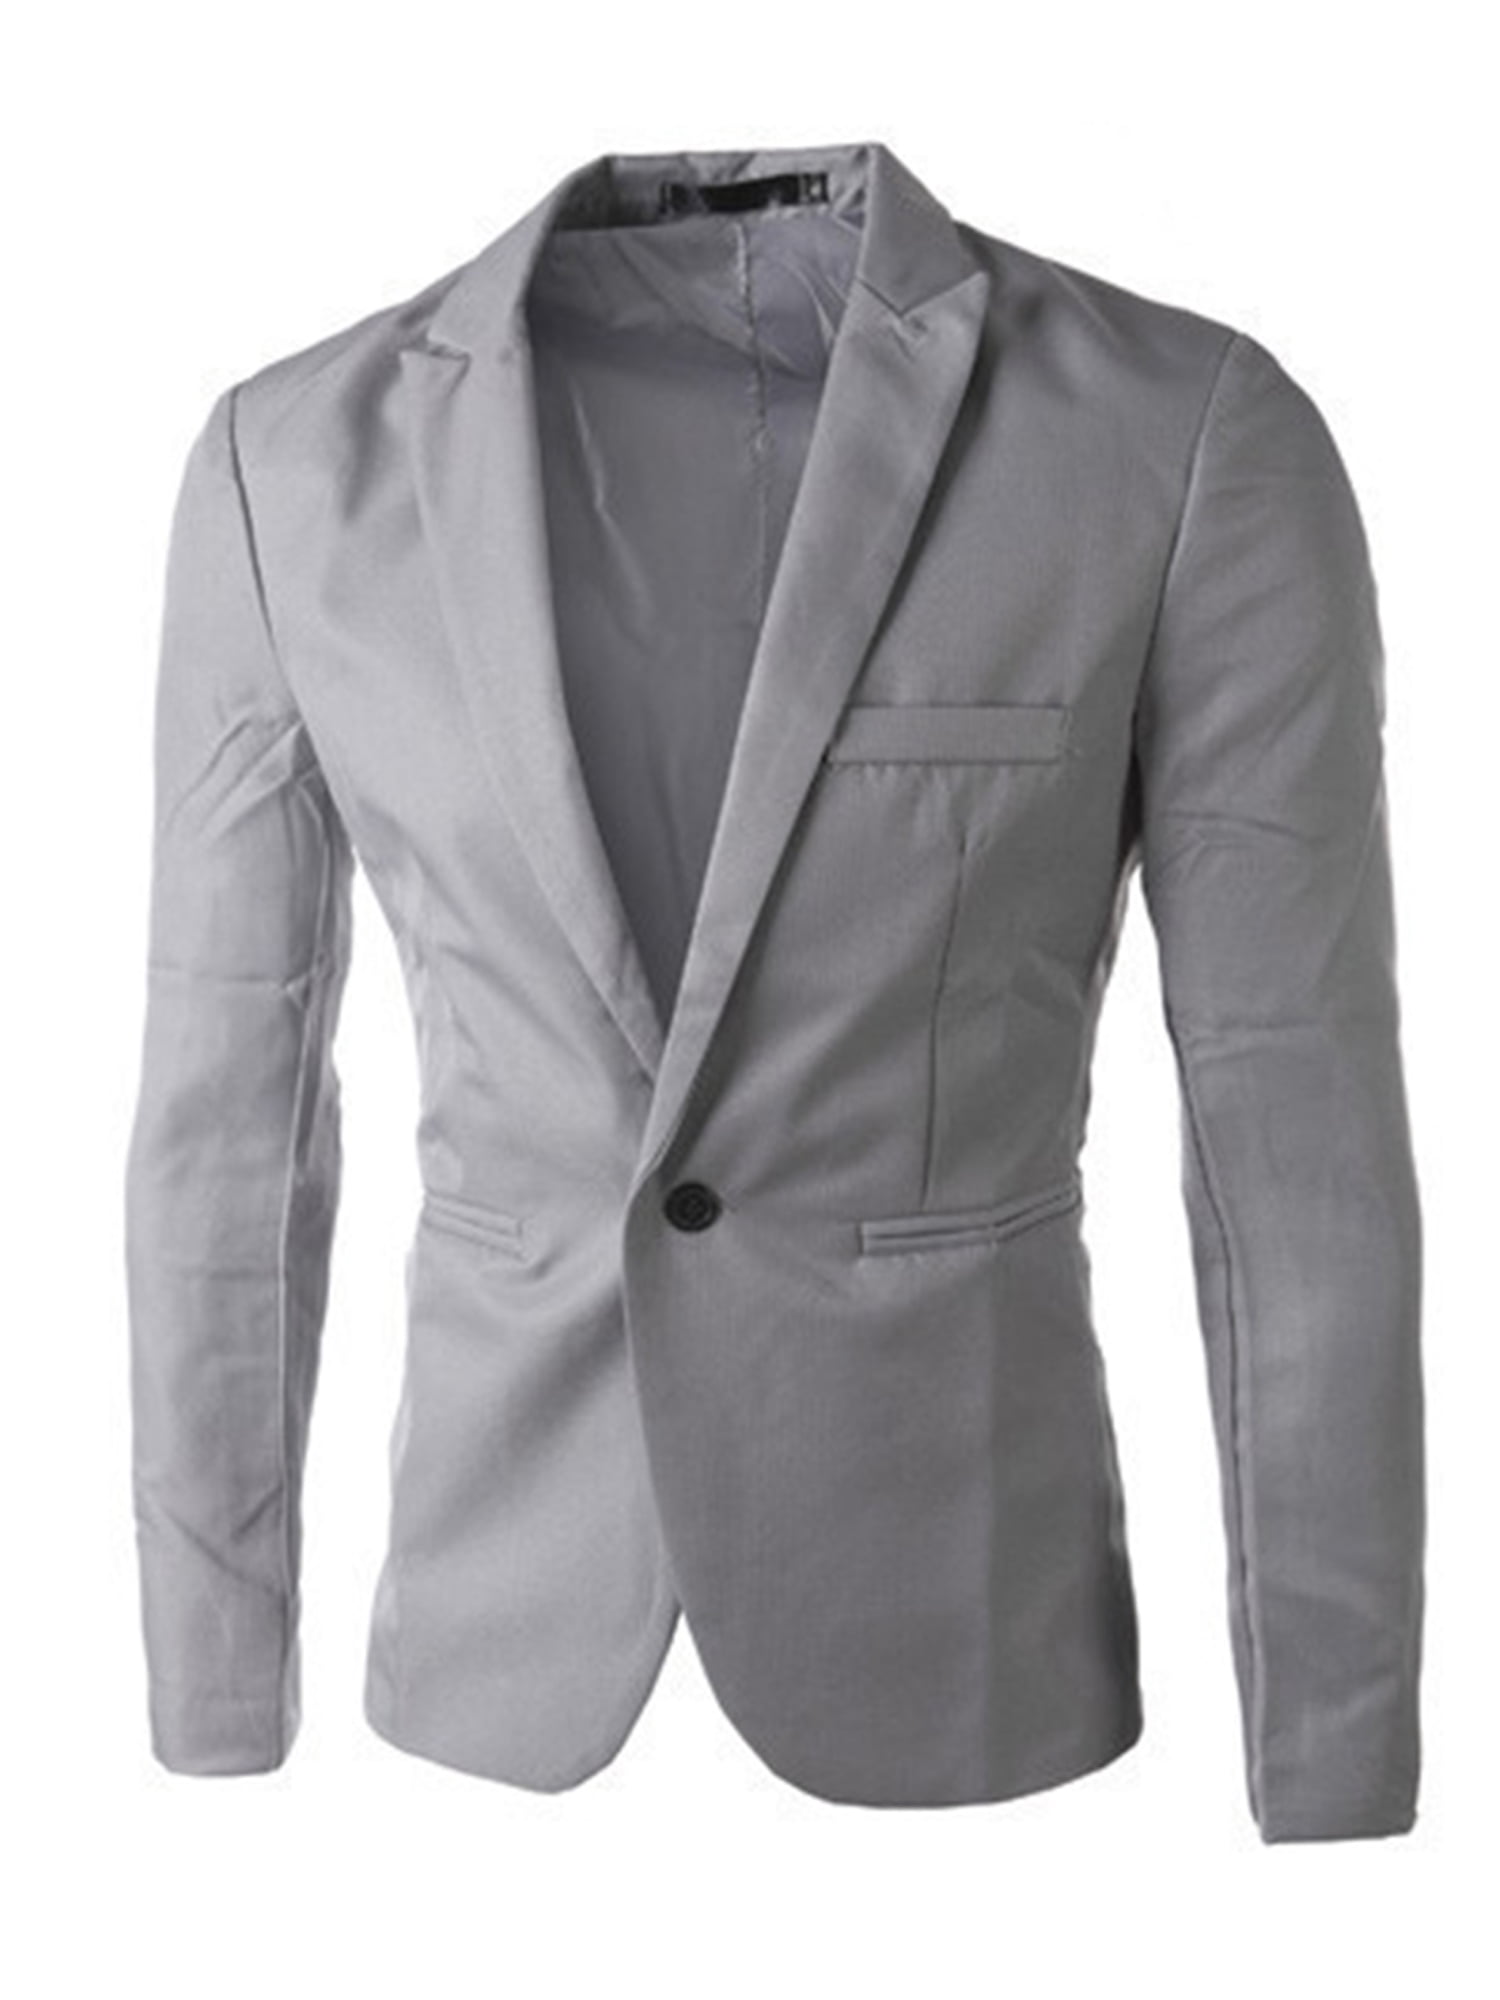 Mens Formal Suit Blazer Coat Business Casual One Button Slim Fit Jacket Tops 